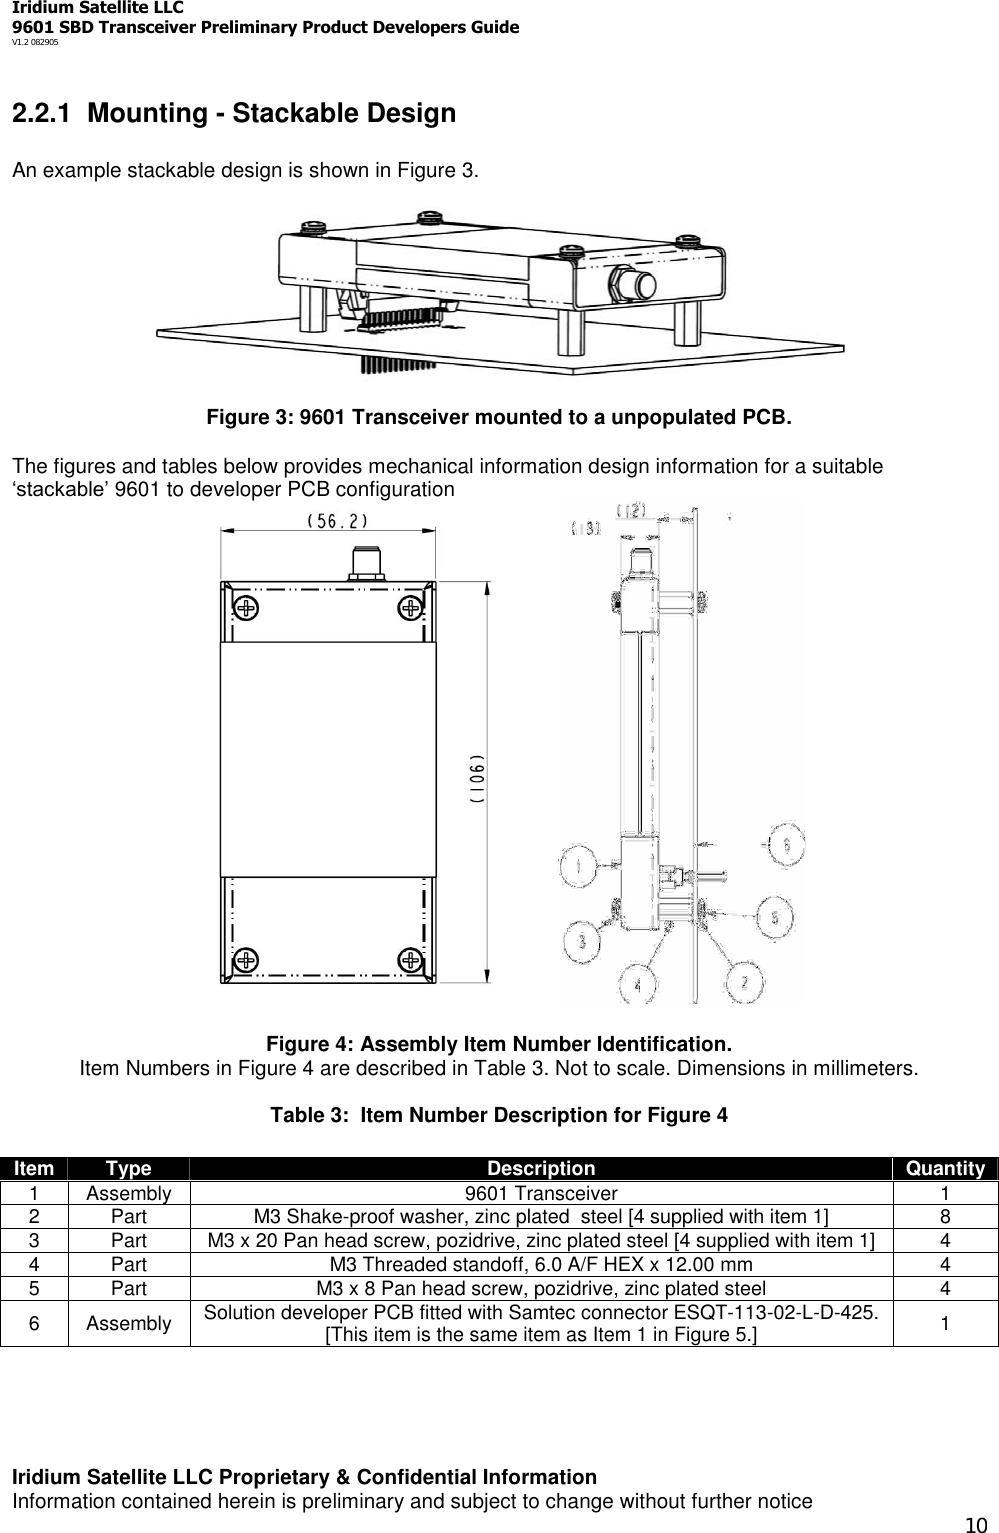 Iridium Satellite LLC9601 SBD Transceiver Preliminary Product Developers GuideV1.2 082905Iridium Satellite LLC Proprietary &amp; Confidential InformationInformation contained herein is preliminary and subject to change without further notice102.2.1 Mounting - Stackable DesignAn example stackable design is shown in Figure 3.Figure 3: 9601 Transceiver mounted to a unpopulated PCB.The figures and tables below provides mechanical information design information for a suitable‘stackable’ 9601 to developer PCB configurationFigure 4: Assembly Item Number Identification.Item Numbers in Figure 4 are described in Table 3. Not to scale. Dimensions in millimeters.Table 3: Item Number Description for Figure 4Item Type Description Quantity1 Assembly 9601 Transceiver 12 Part M3 Shake-proof washer, zinc plated steel [4 supplied with item 1] 83 Part M3 x 20 Pan head screw, pozidrive, zinc plated steel [4 supplied with item 1] 44 Part M3 Threaded standoff, 6.0 A/F HEX x 12.00 mm 45 Part M3 x 8 Pan head screw, pozidrive, zinc plated steel 46 Assembly Solution developer PCB fitted with Samtec connector ESQT-113-02-L-D-425.[This item is the same item as Item 1 in Figure 5.] 1